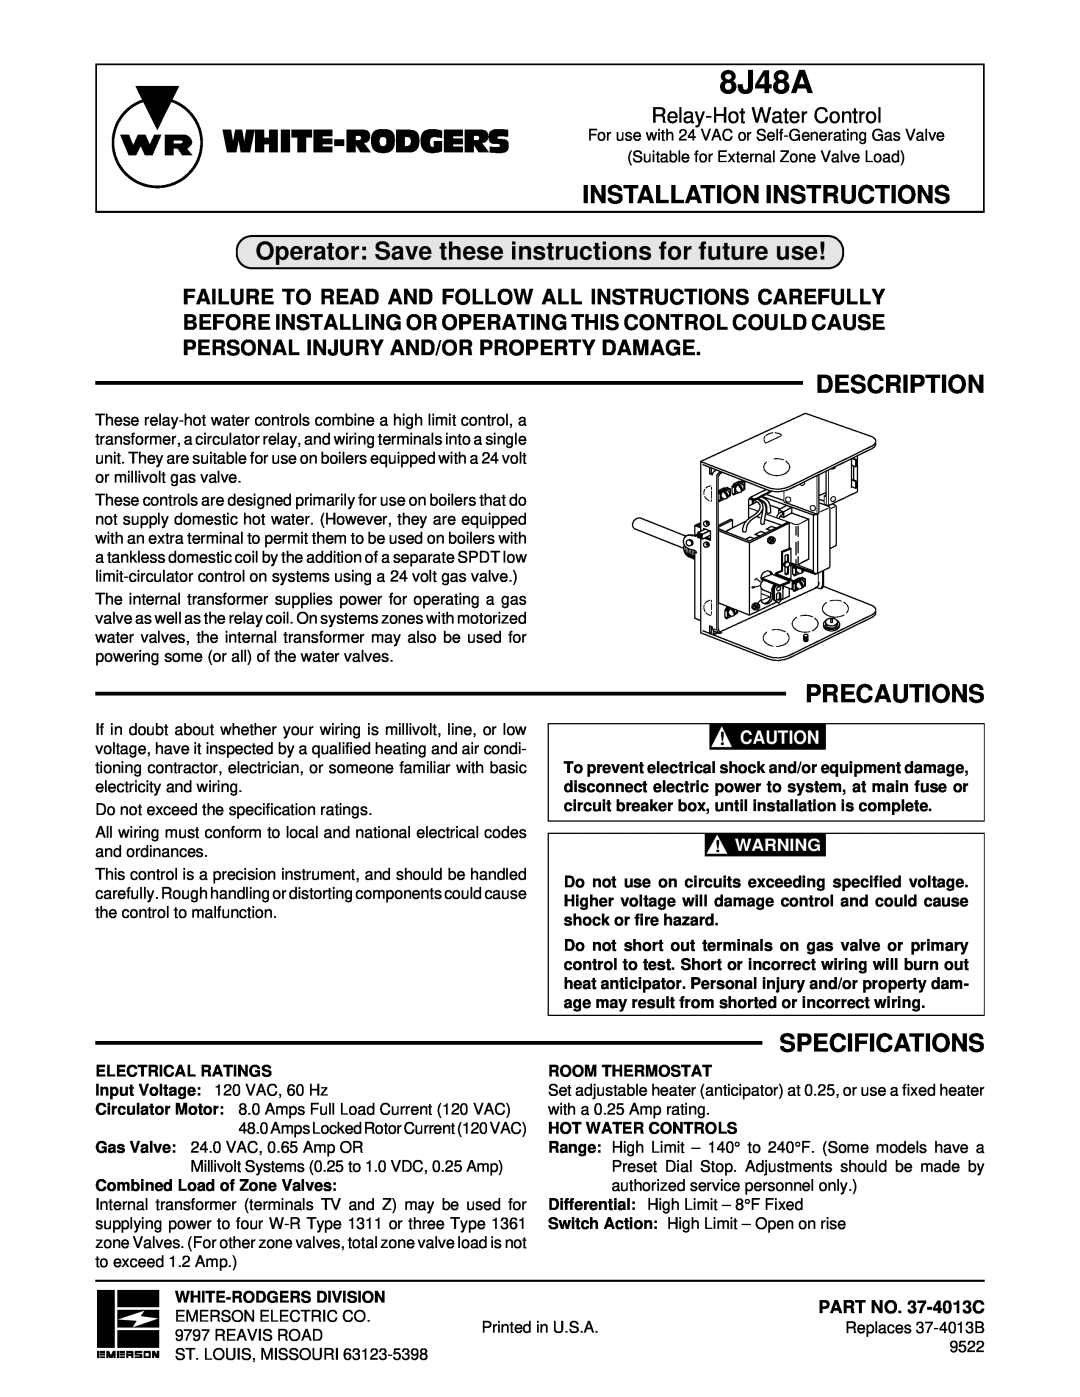 White Rodgers 8J48A specifications Installation Instructions, Operator Save these instructions for future use, Description 